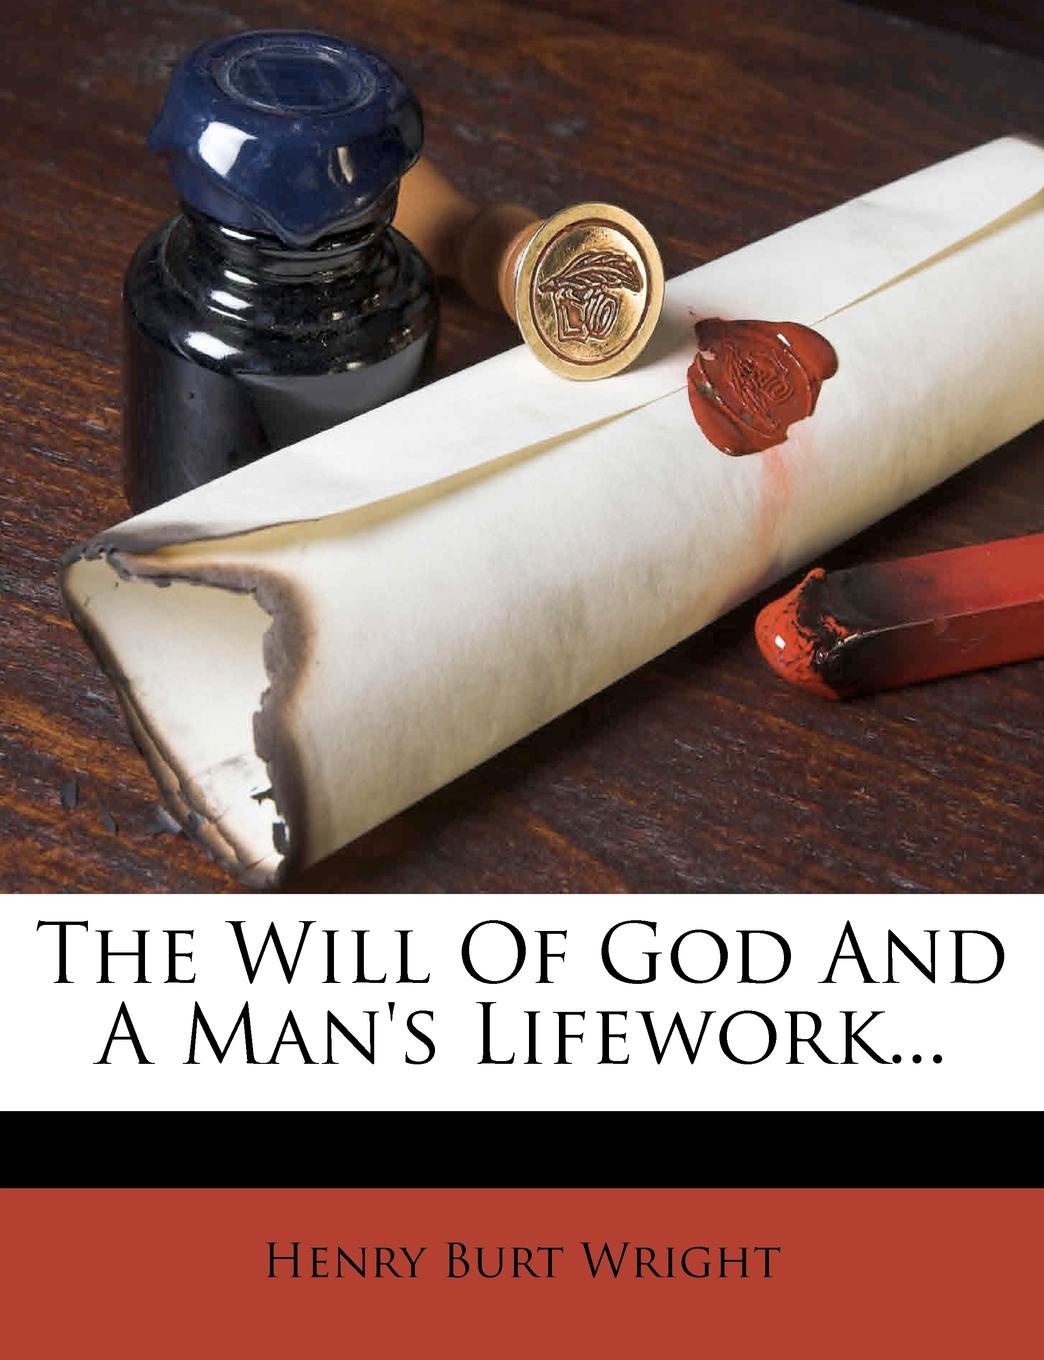 The Will Of God And A Man.s Lifework...